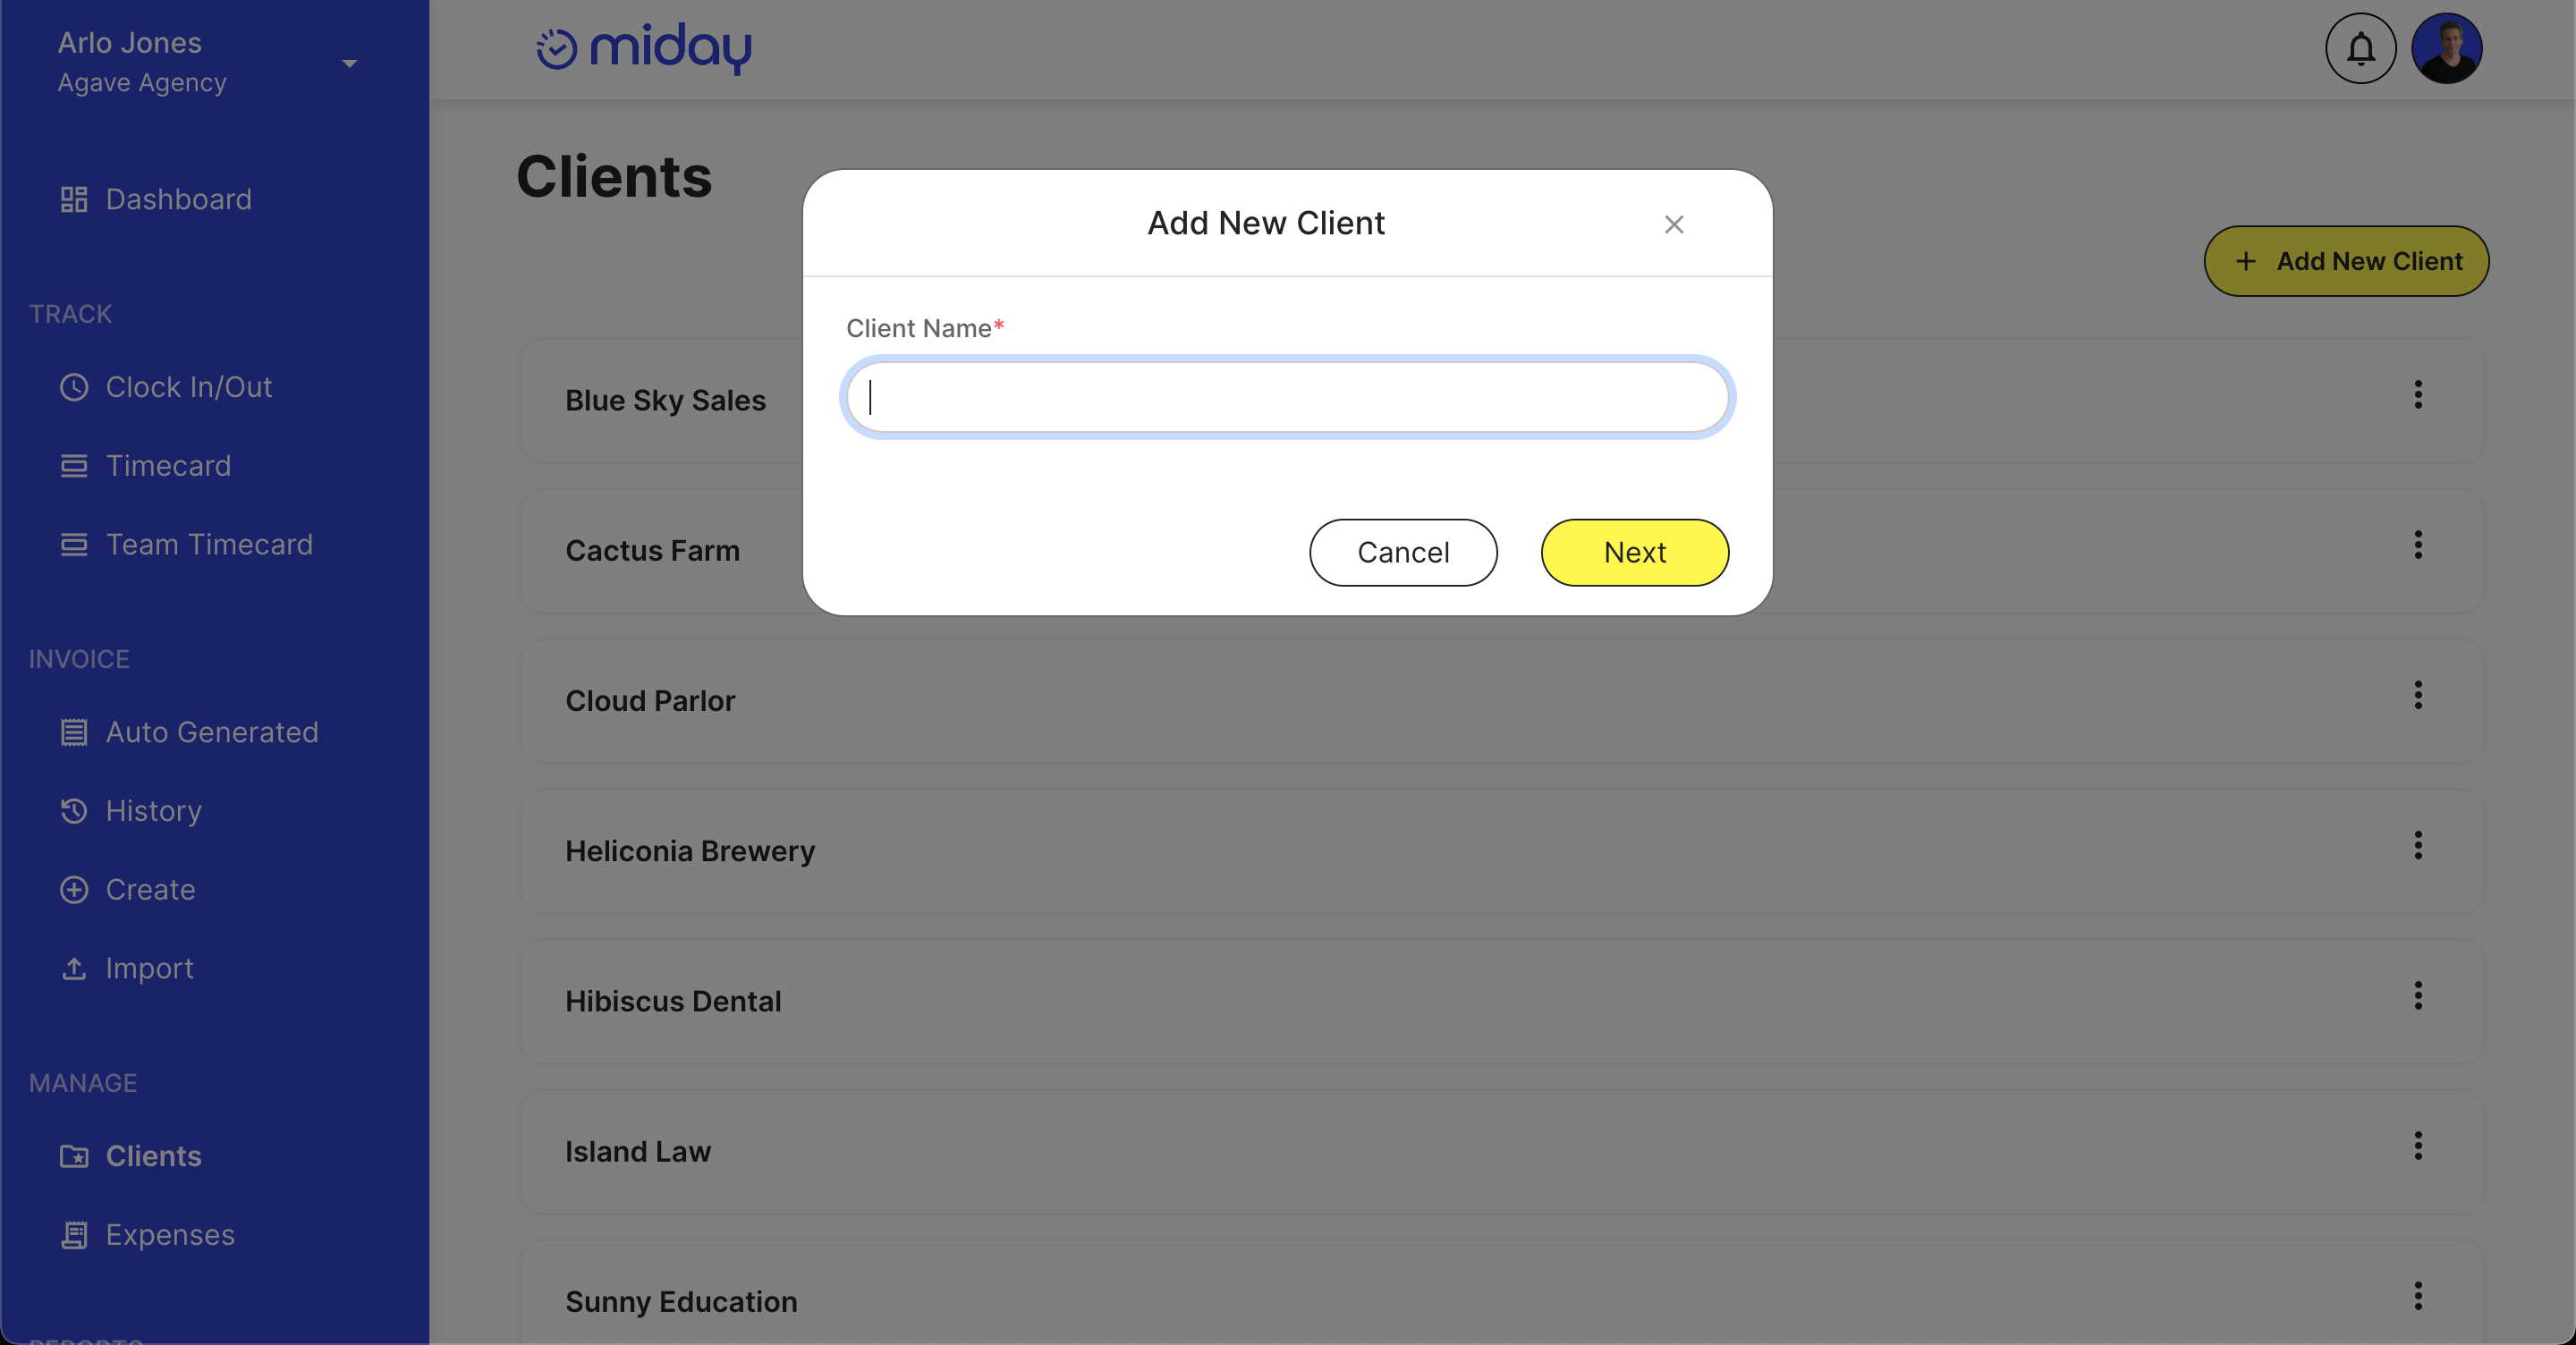 Screenshot of the first miday prompt asking the user to enter a client name.